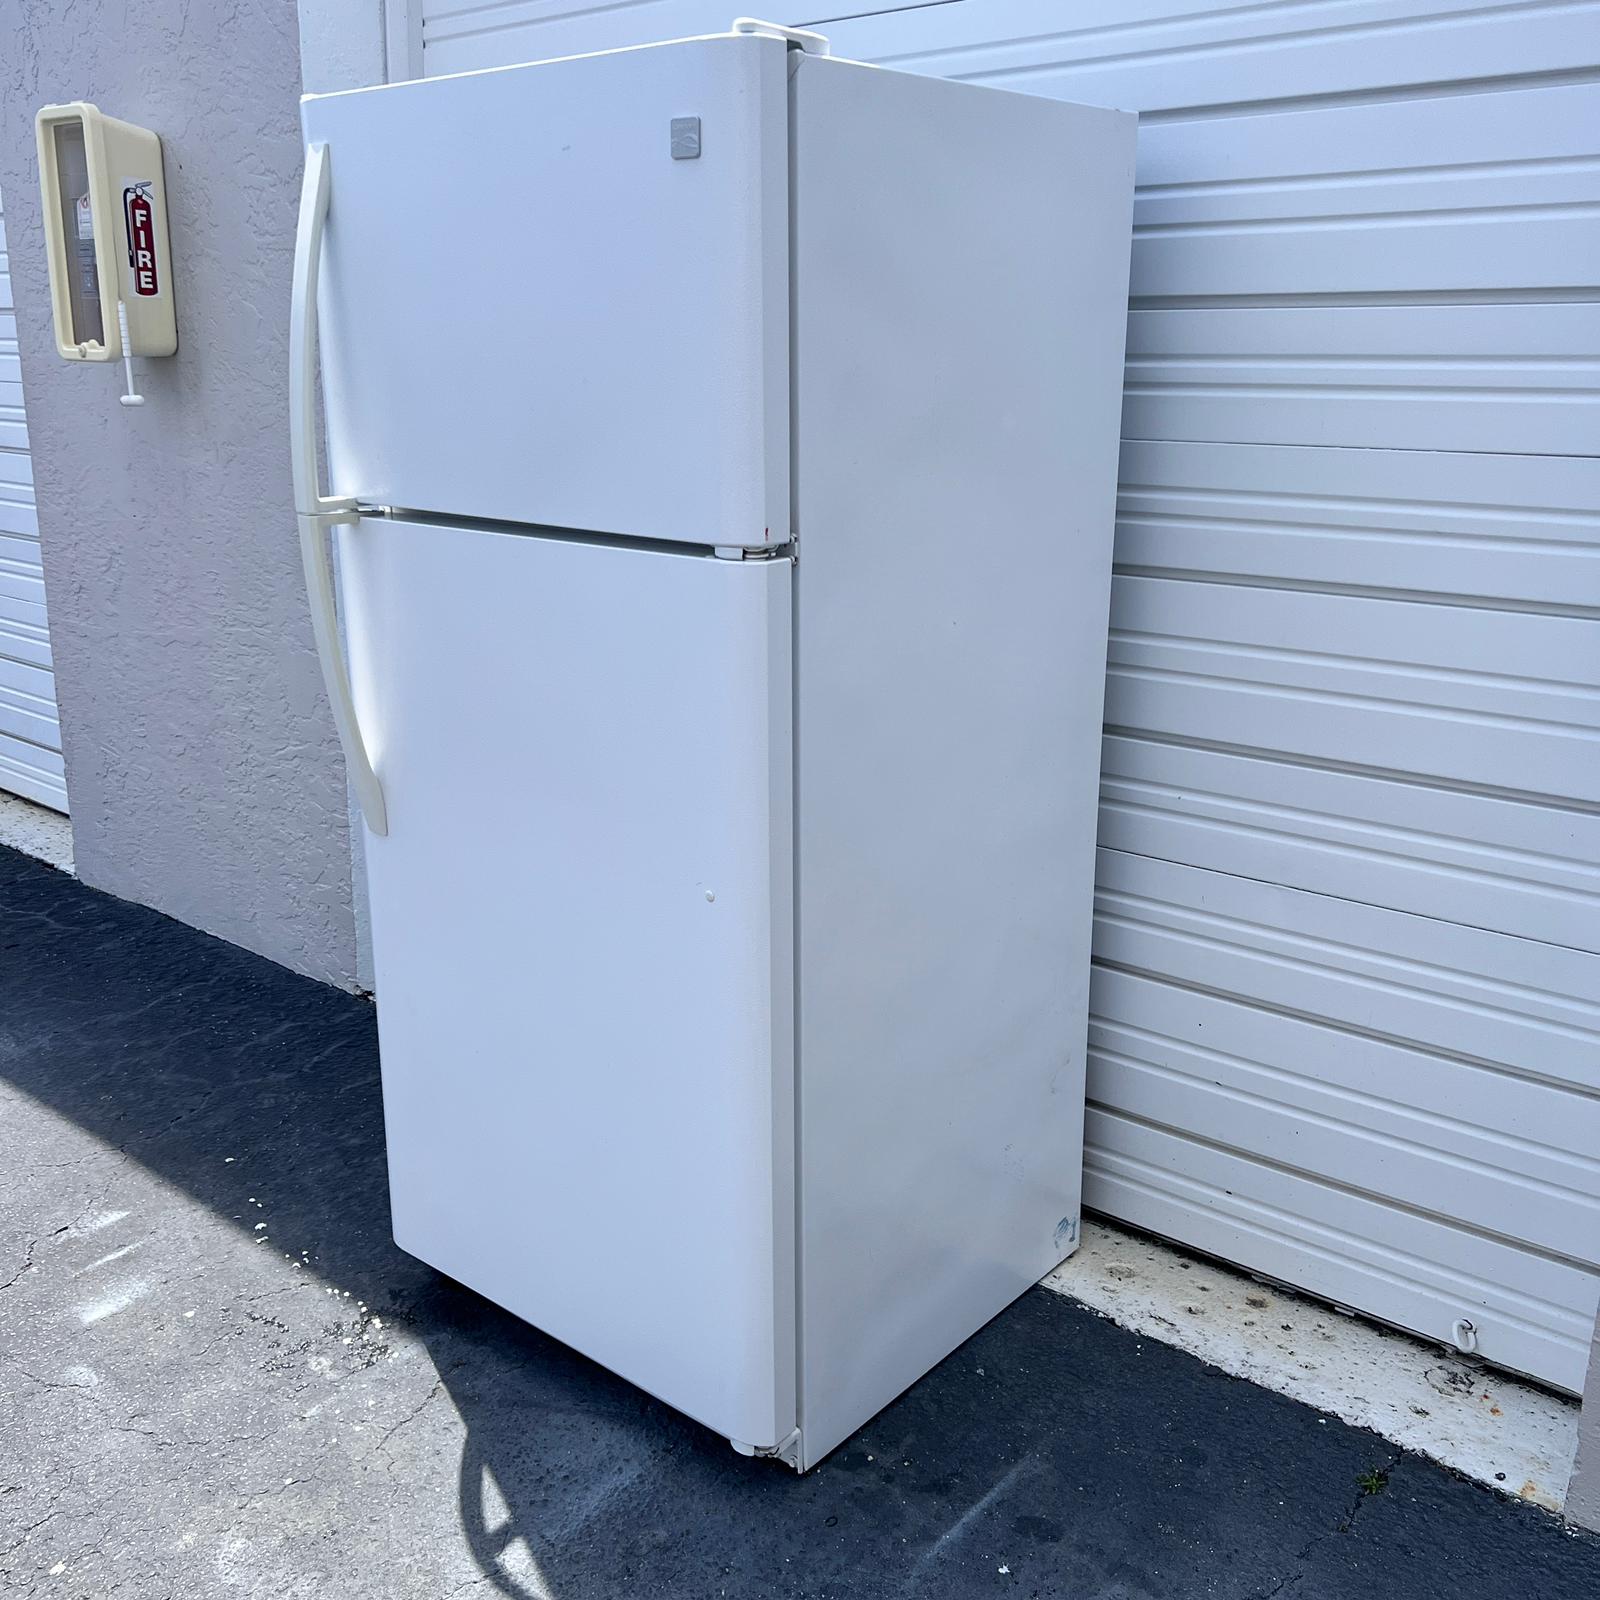 Kenmore Top and Bottom Refrigerator with Ice Maker